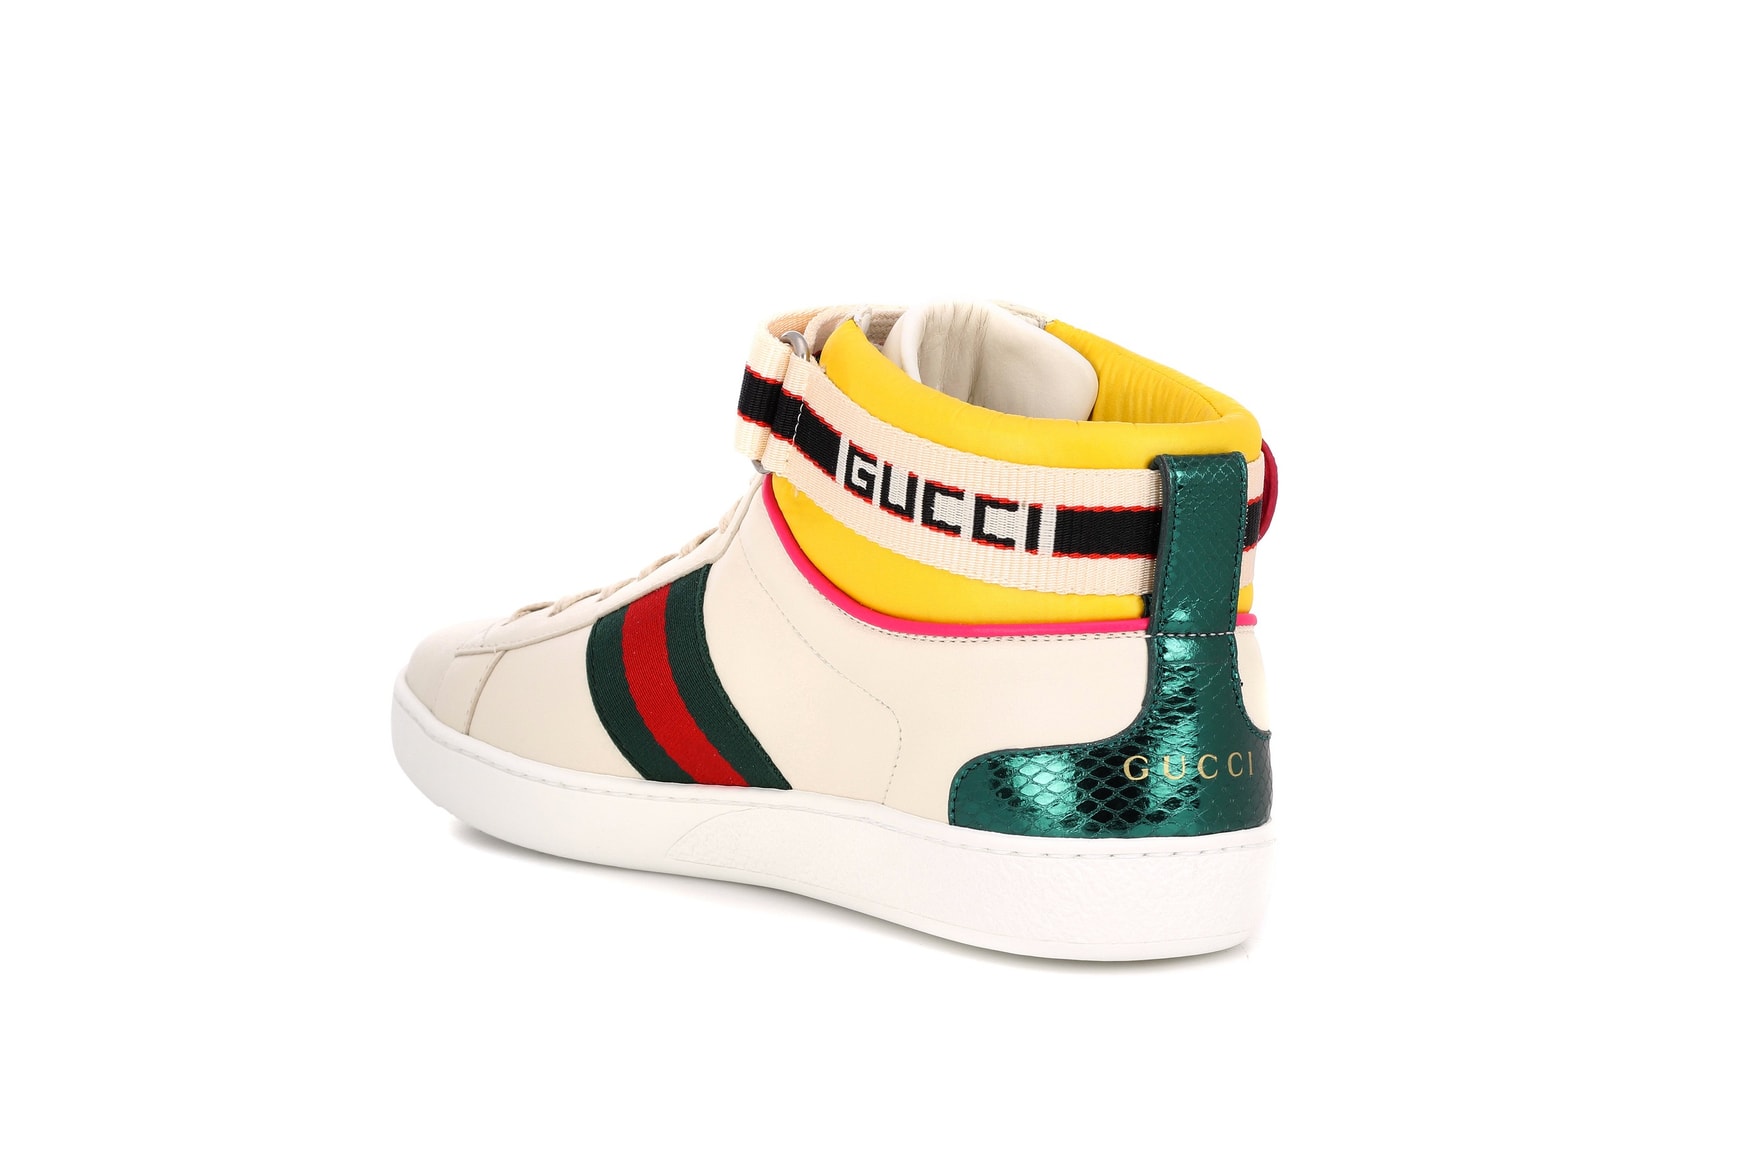 Gucci High-Top Ace Logo Sneakers White Pink Yellow Retro 70s